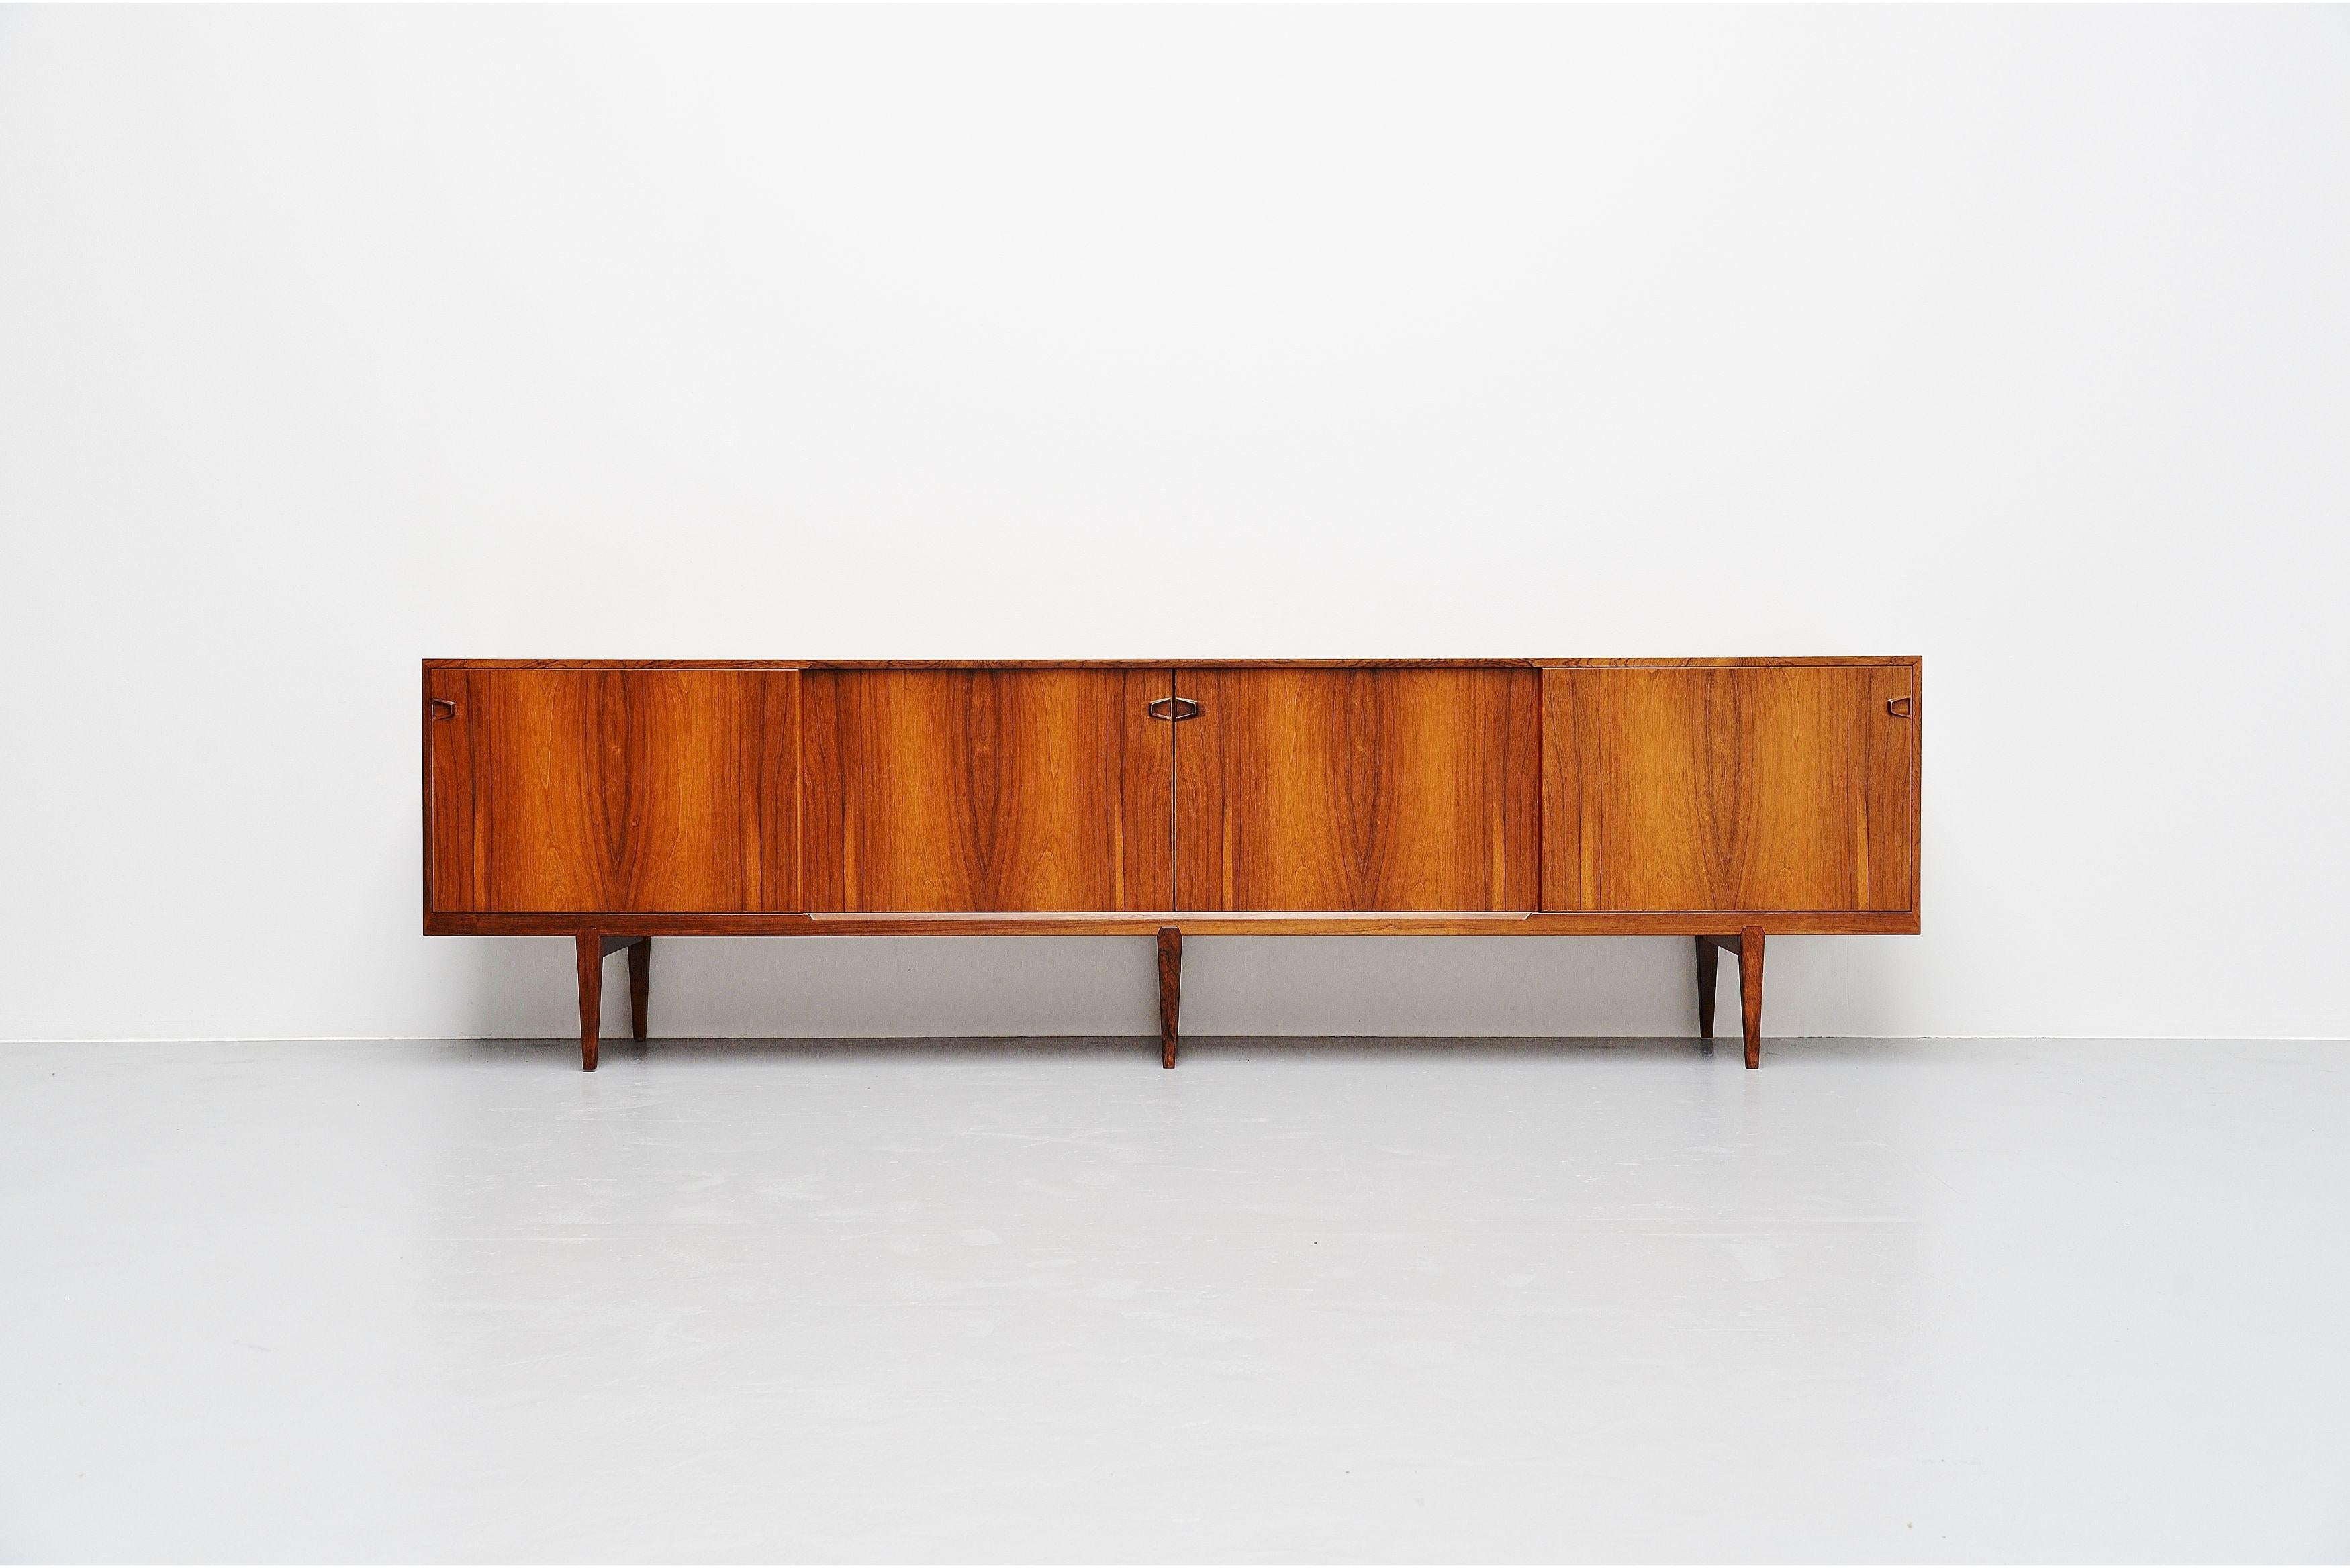 Highly refined rosewood sideboard model 9940 designed by Henry Rosengren Hansen for Rosengren Hansen, Denmark 1960. The sideboard has 4 sliding doors with 2 shelves and 8 drawers behind them. Very nice crafted sculptural handles and a nice detail is